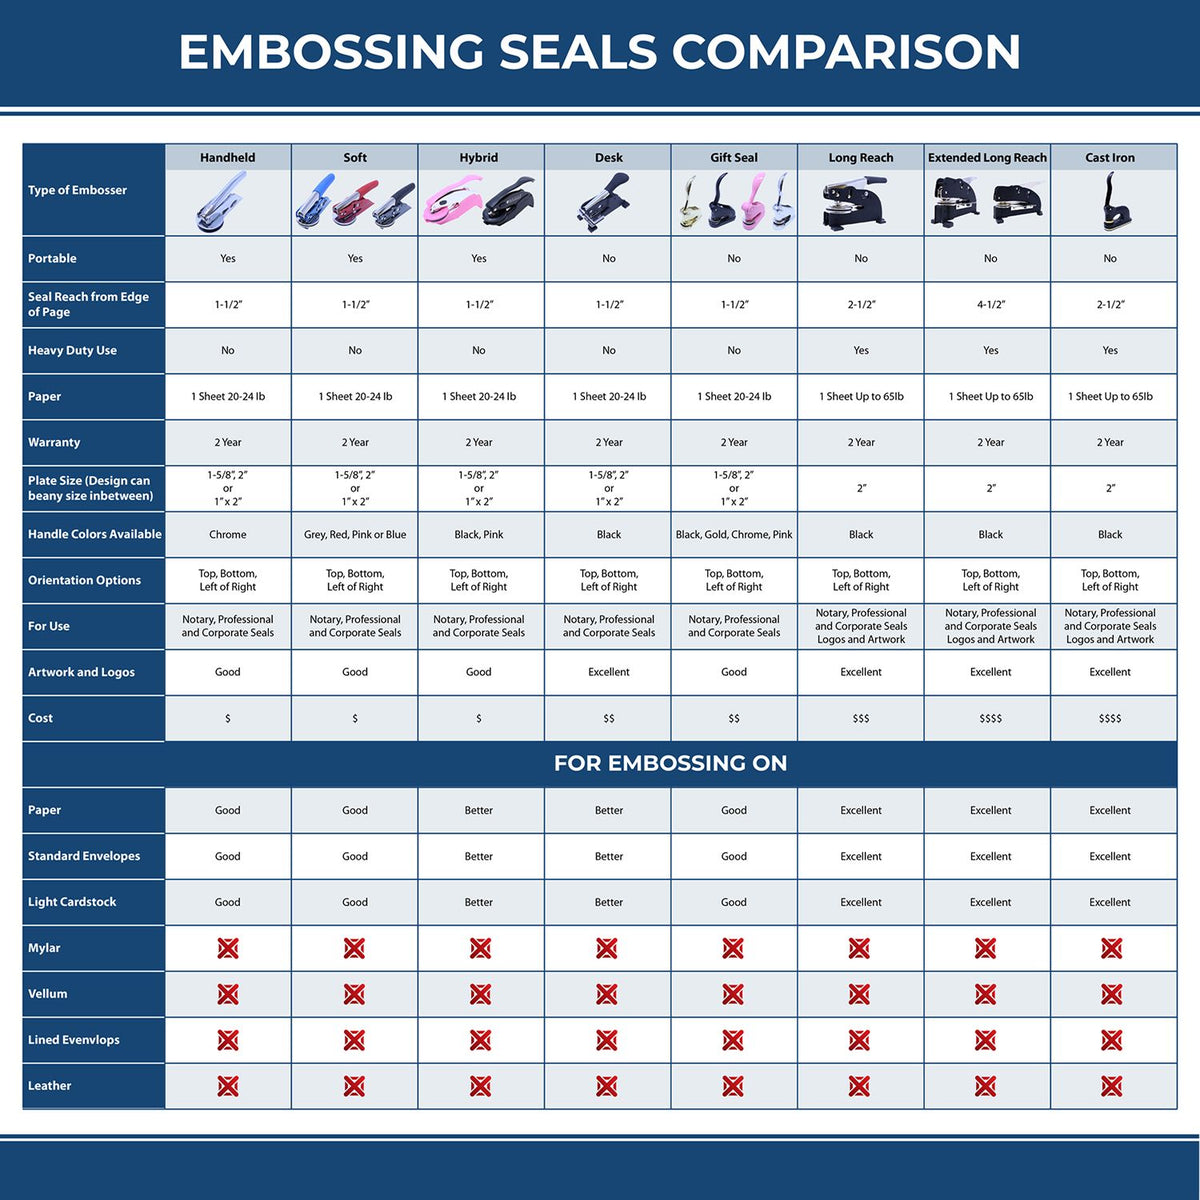 A comparison chart for the different types of mount models available for the Soft Vermont Professional Engineer Seal.